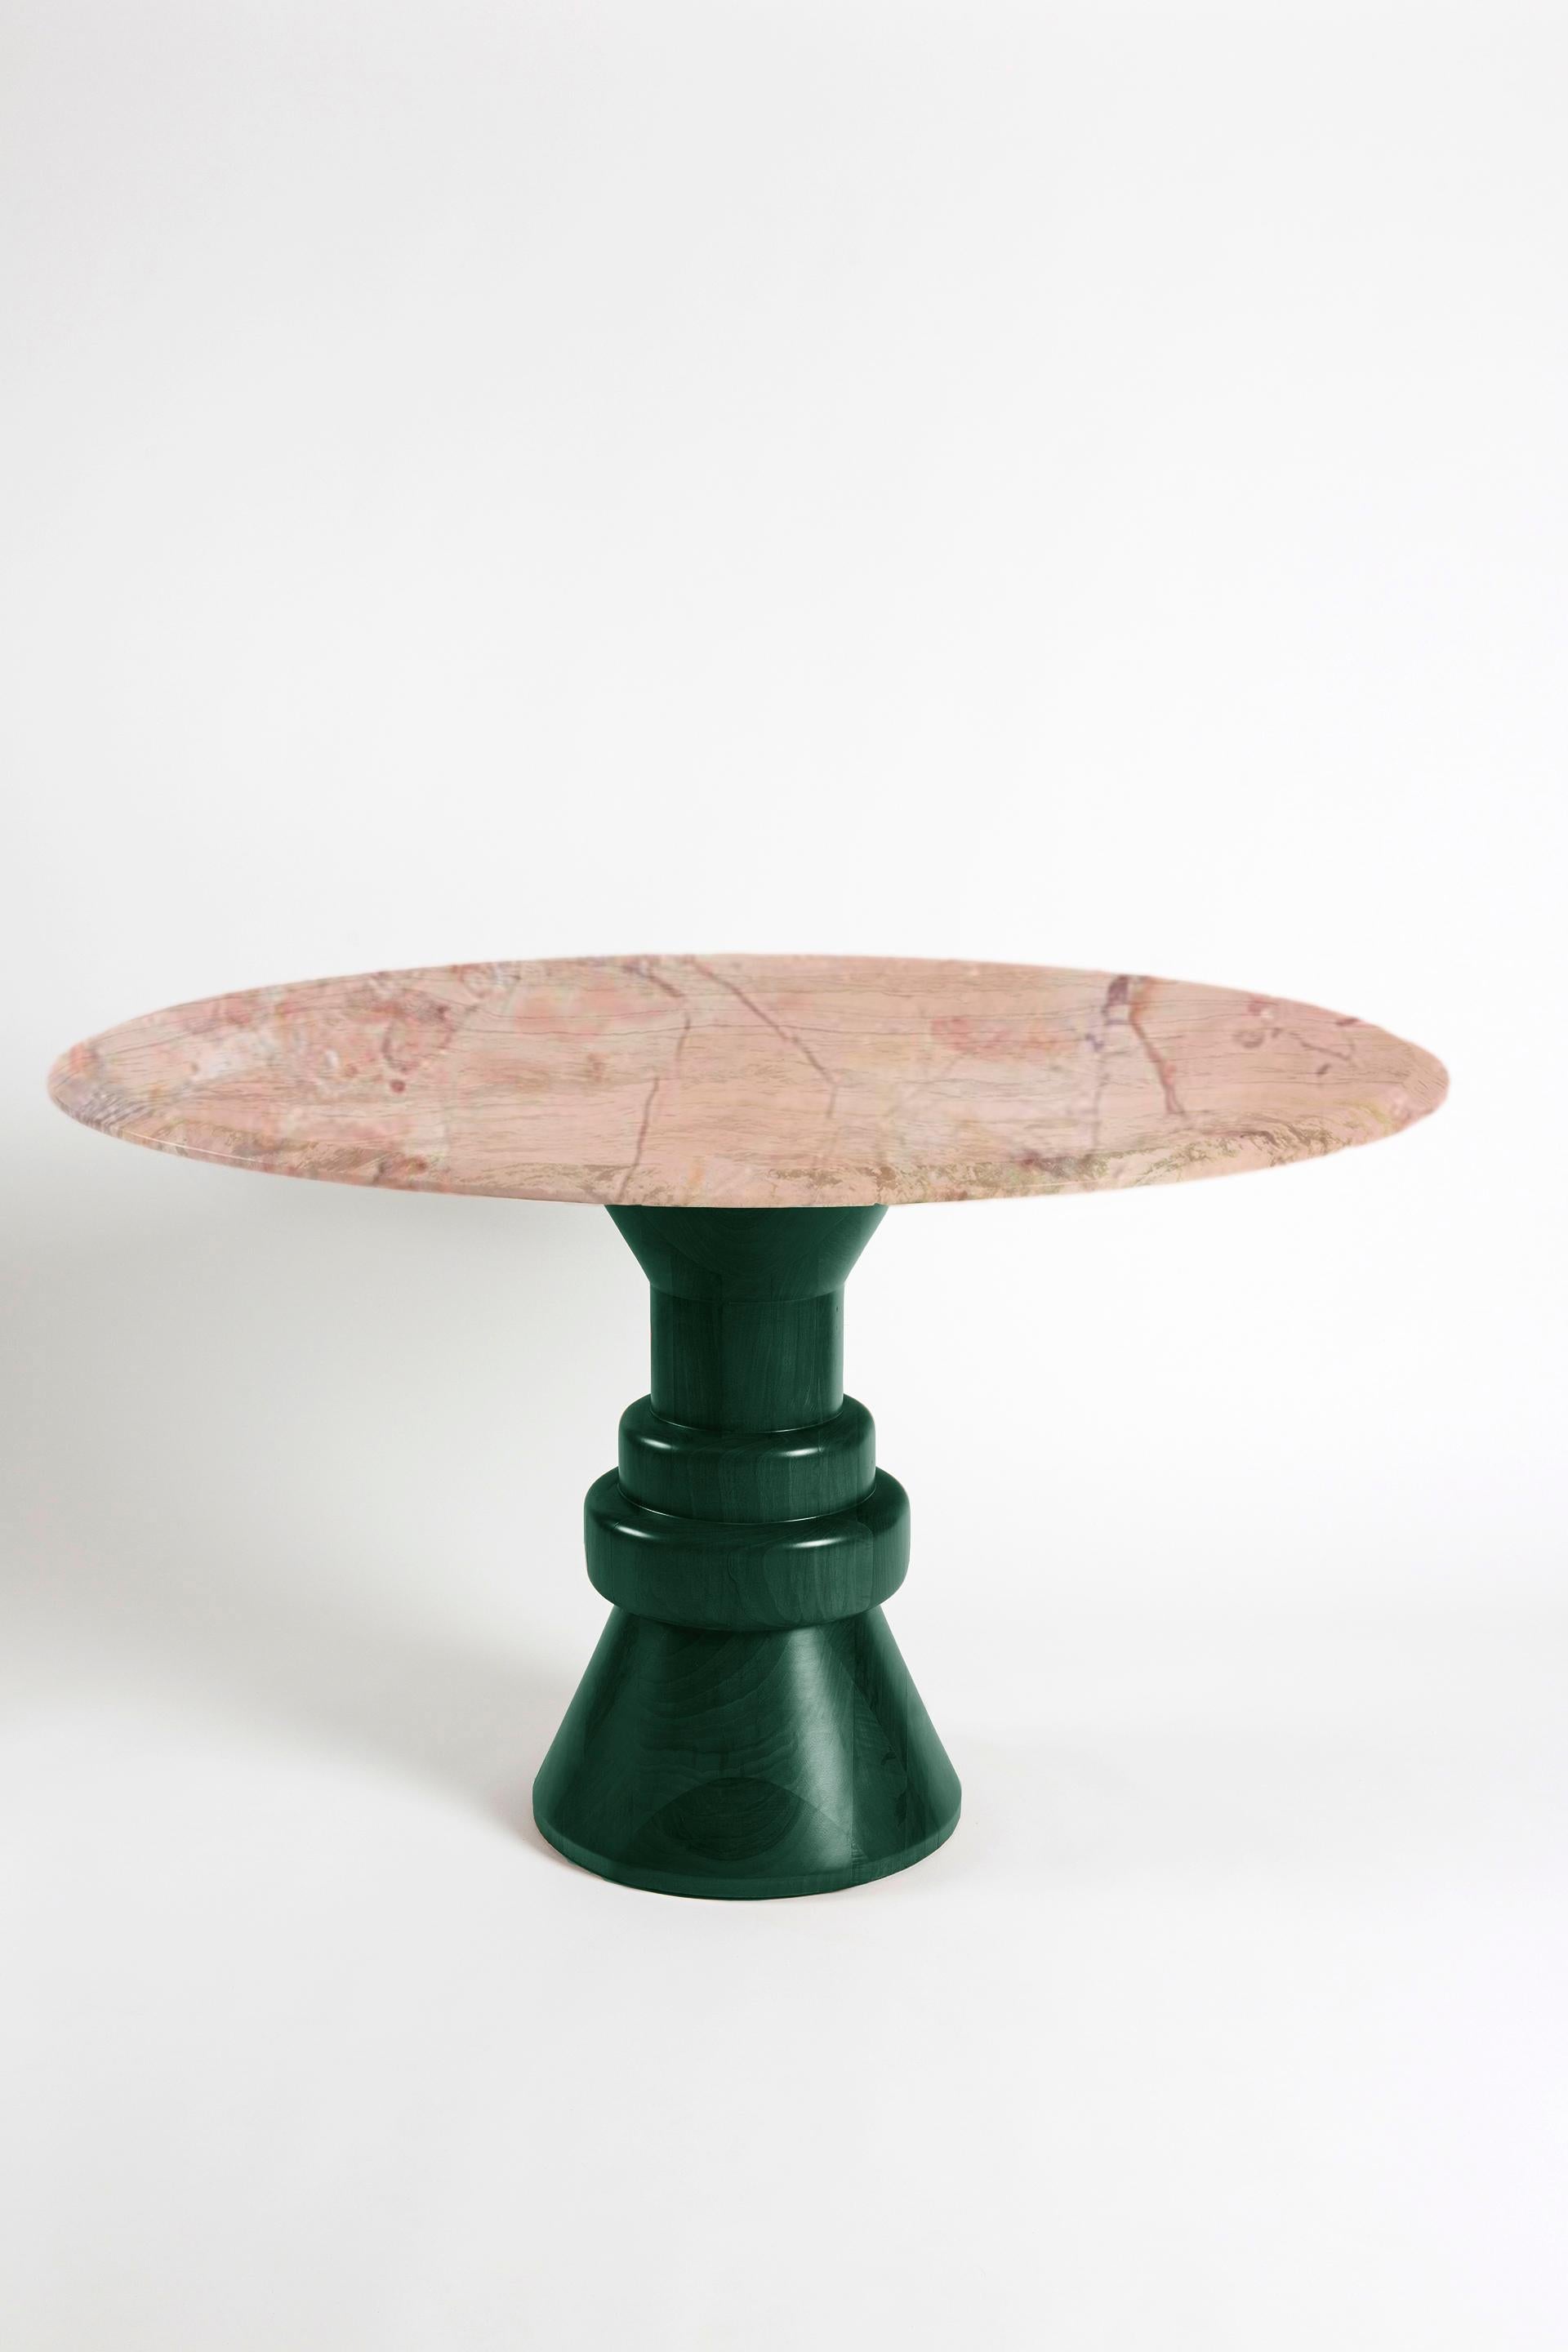 21st Century Cream Marble Round Dining Table with Sculptural Wooden Base For Sale 2